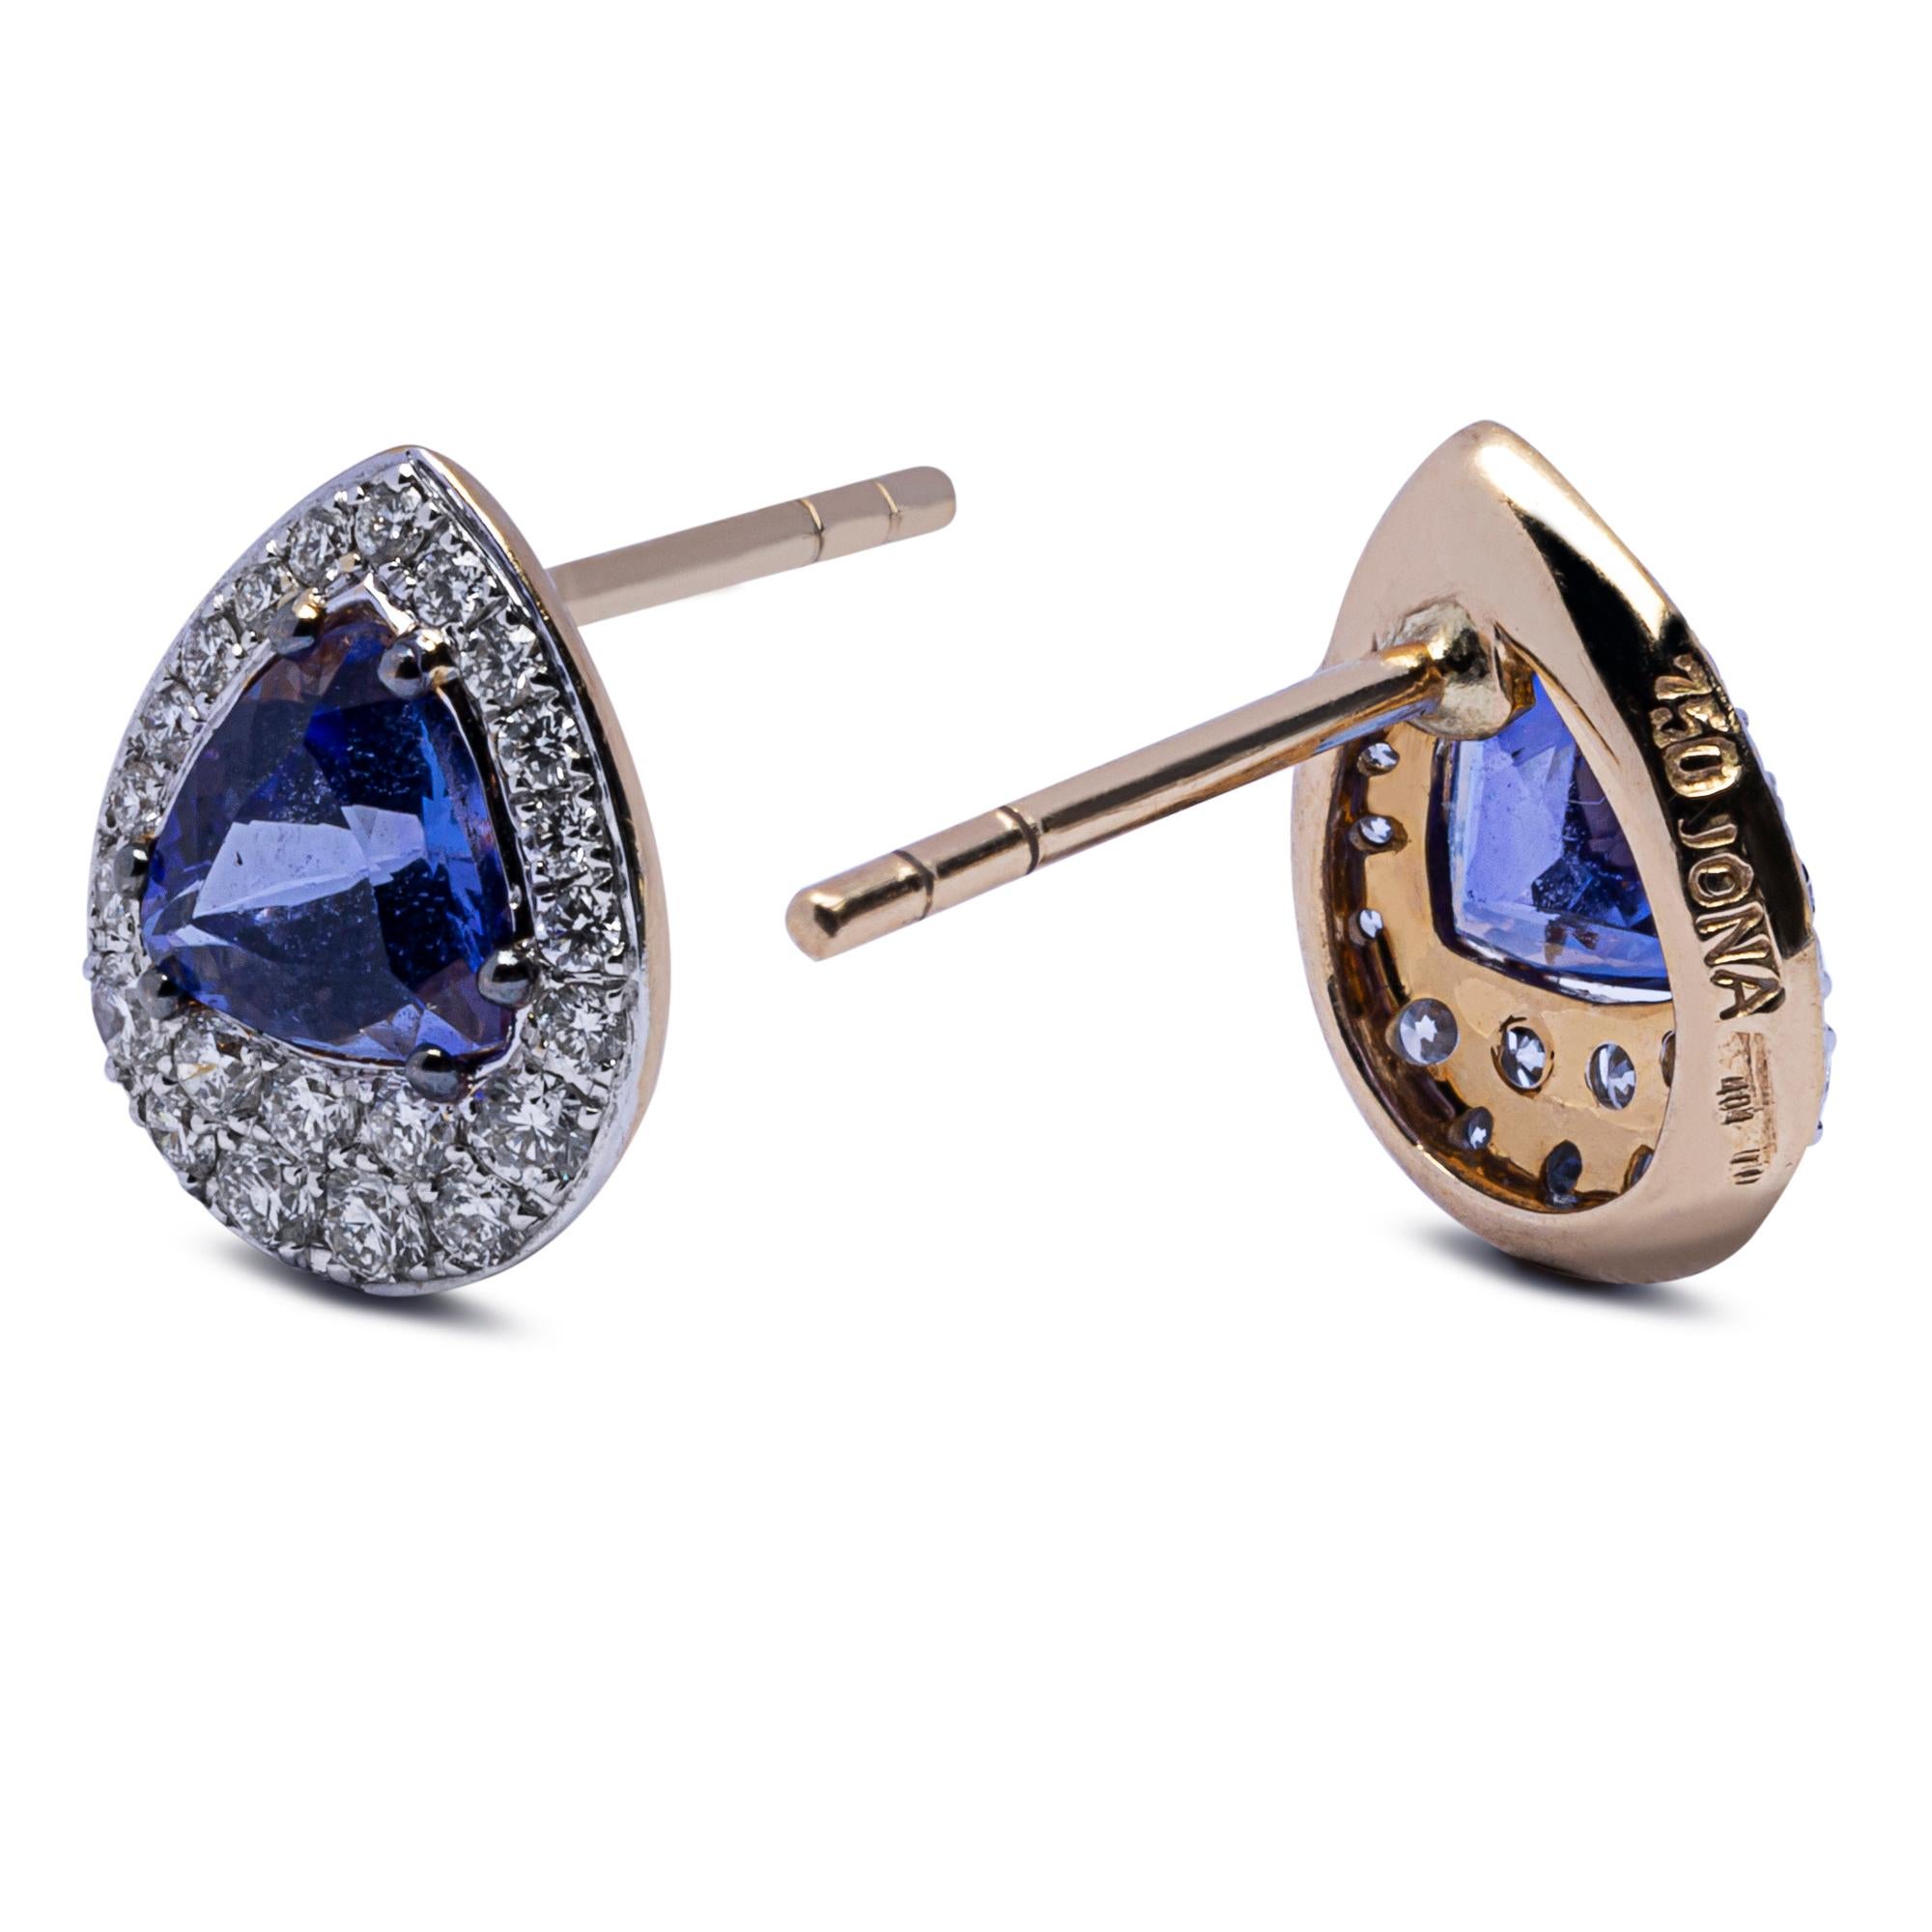 Alex Jona design collection, hand crafted in Italy, 18k yellow and white gold stud earrings centering two triangular cut Tanzanites weighing 1.35 carats surrounded by 44 white diamonds, F Color, VVS Clarity weighing 0.48 carats in total.
Dimensions: